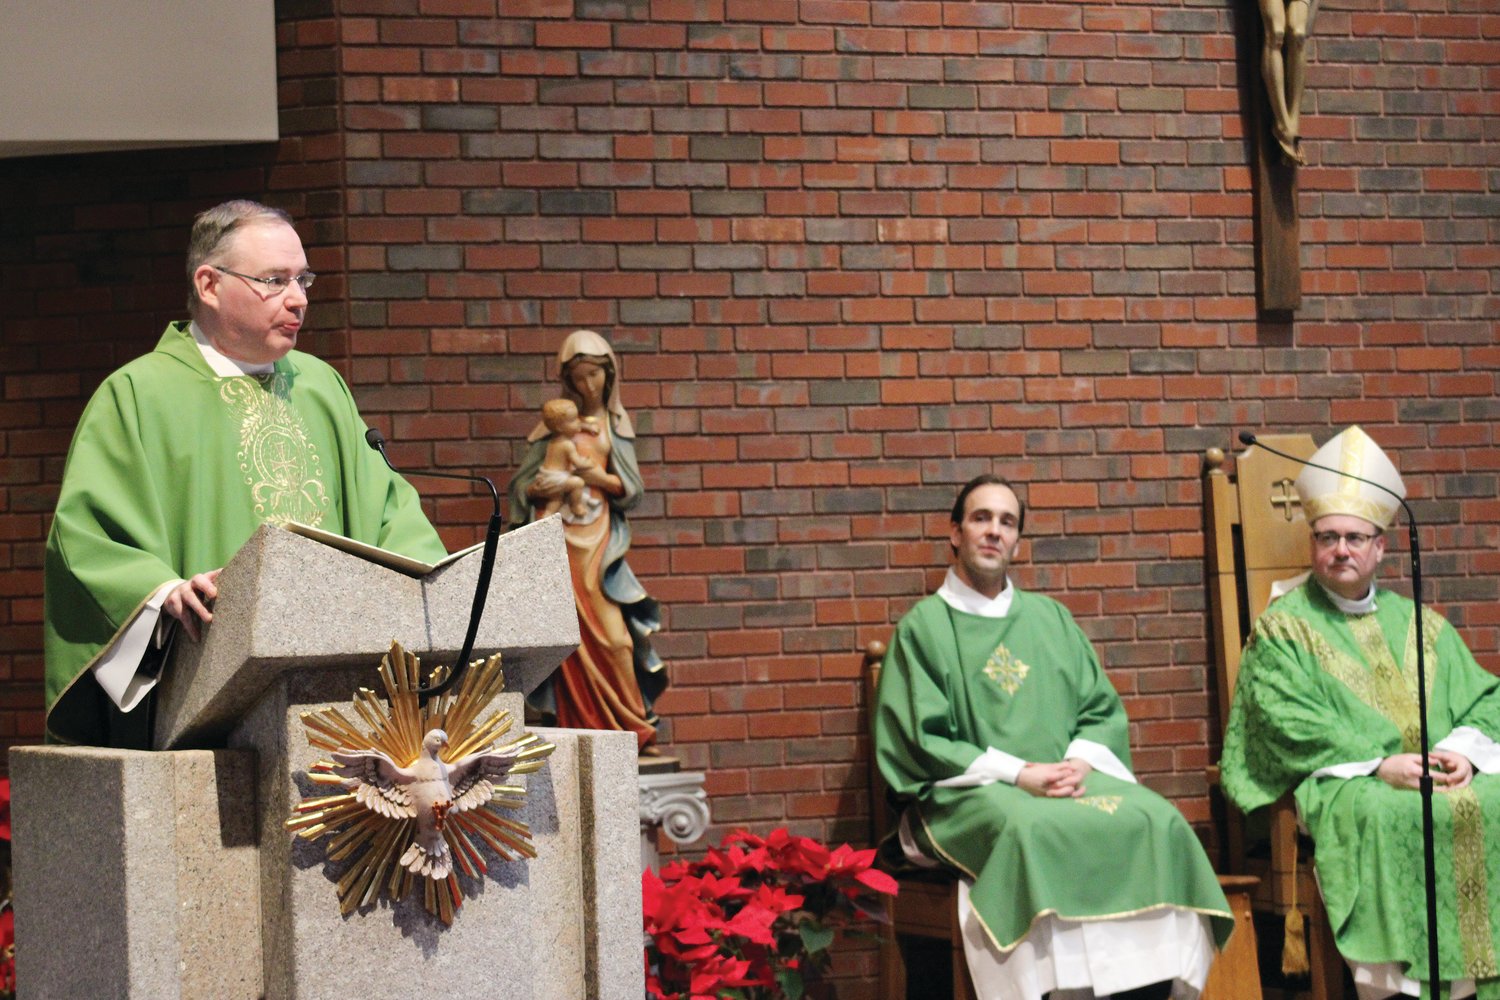 St. Philip Pastor Father Michael McMahon addresses parishioners at the end of the Mass.